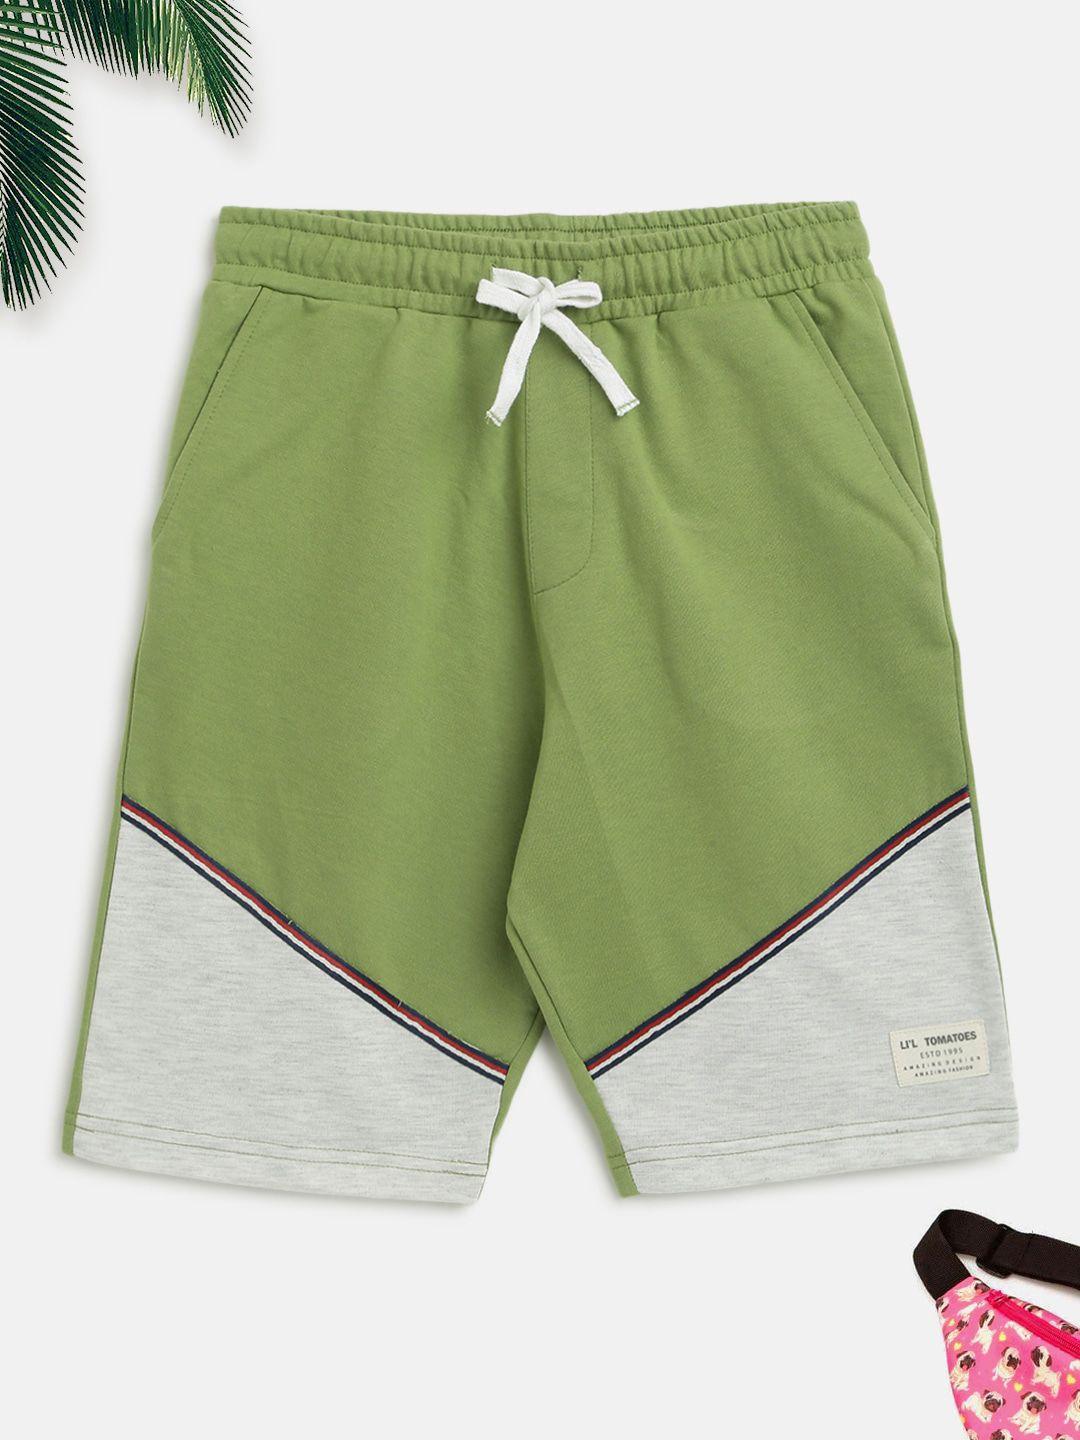 lil tomatoes boys olive green colourblocked outdoor sports shorts 100% cotton